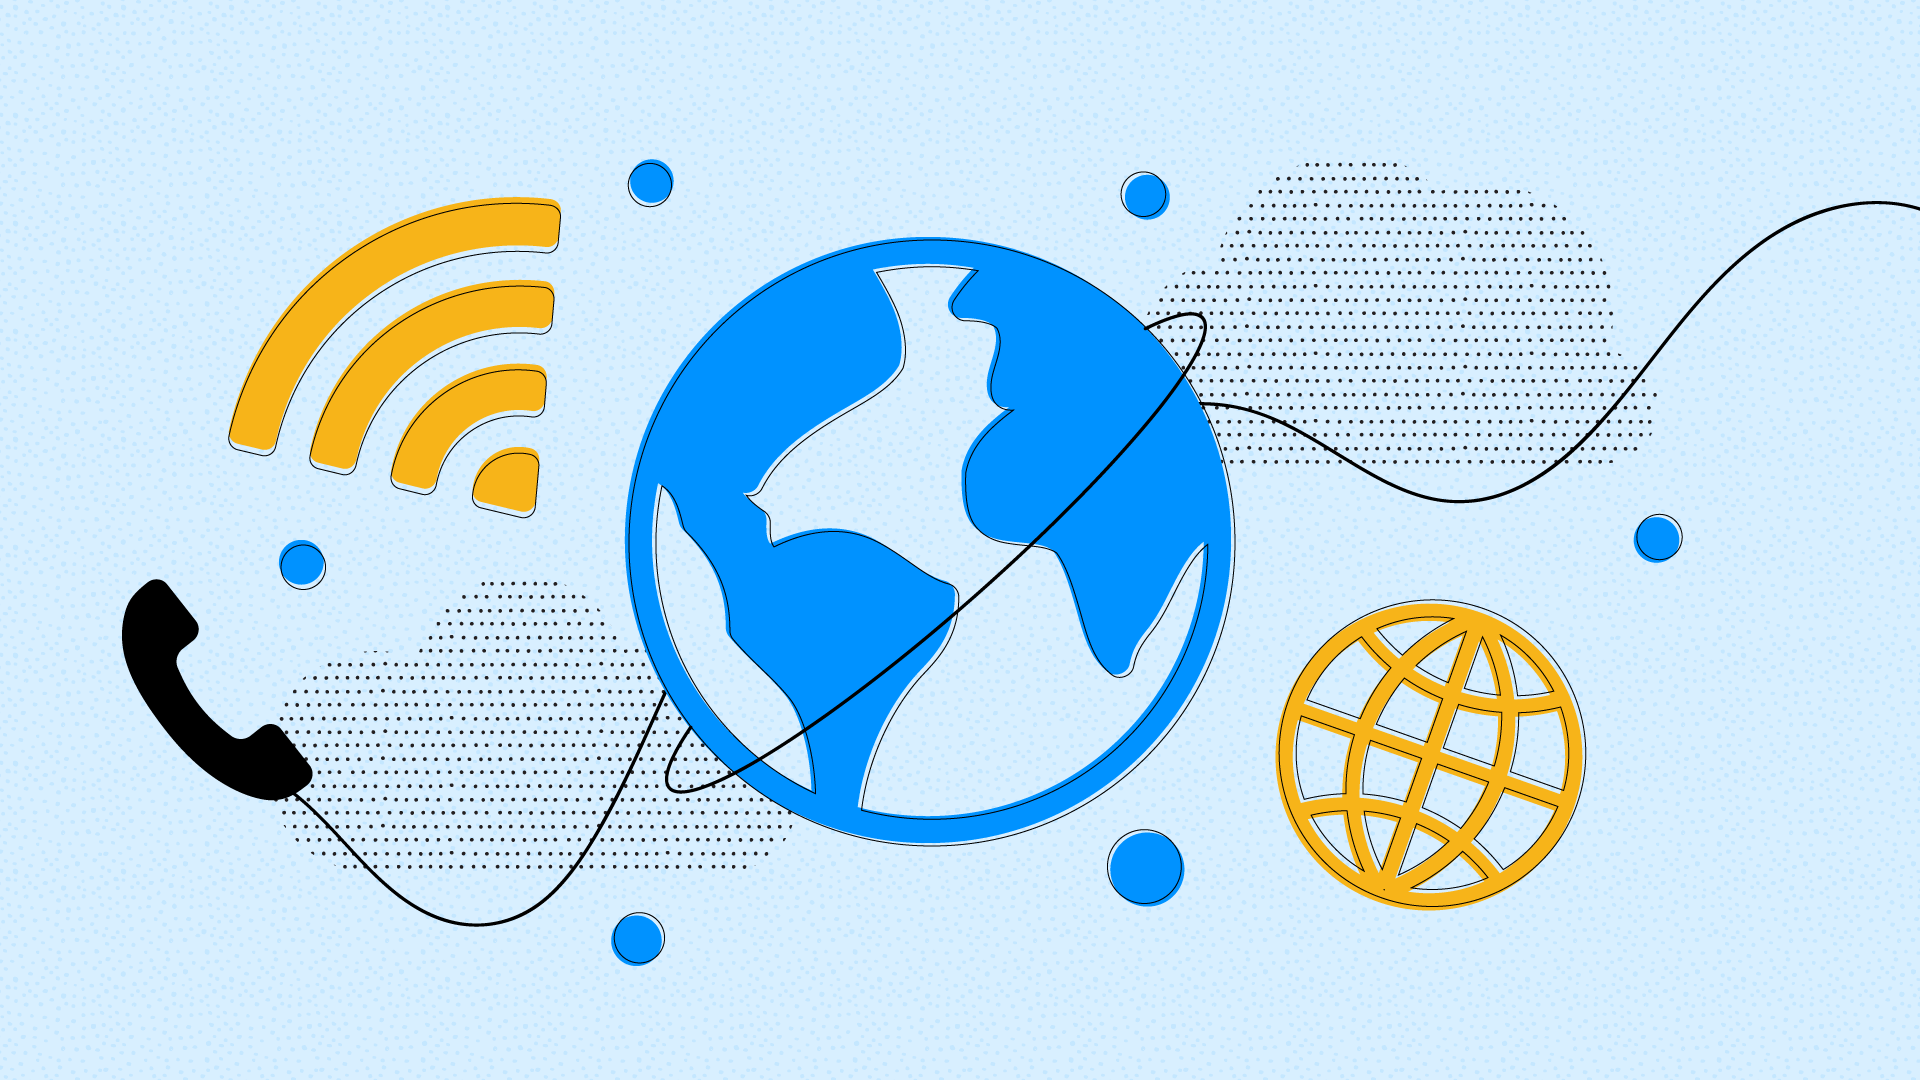 https://www.nextiva.com/blog/wp-content/uploads/sites/2/2019/10/Wifi-Calling-featured-image.png